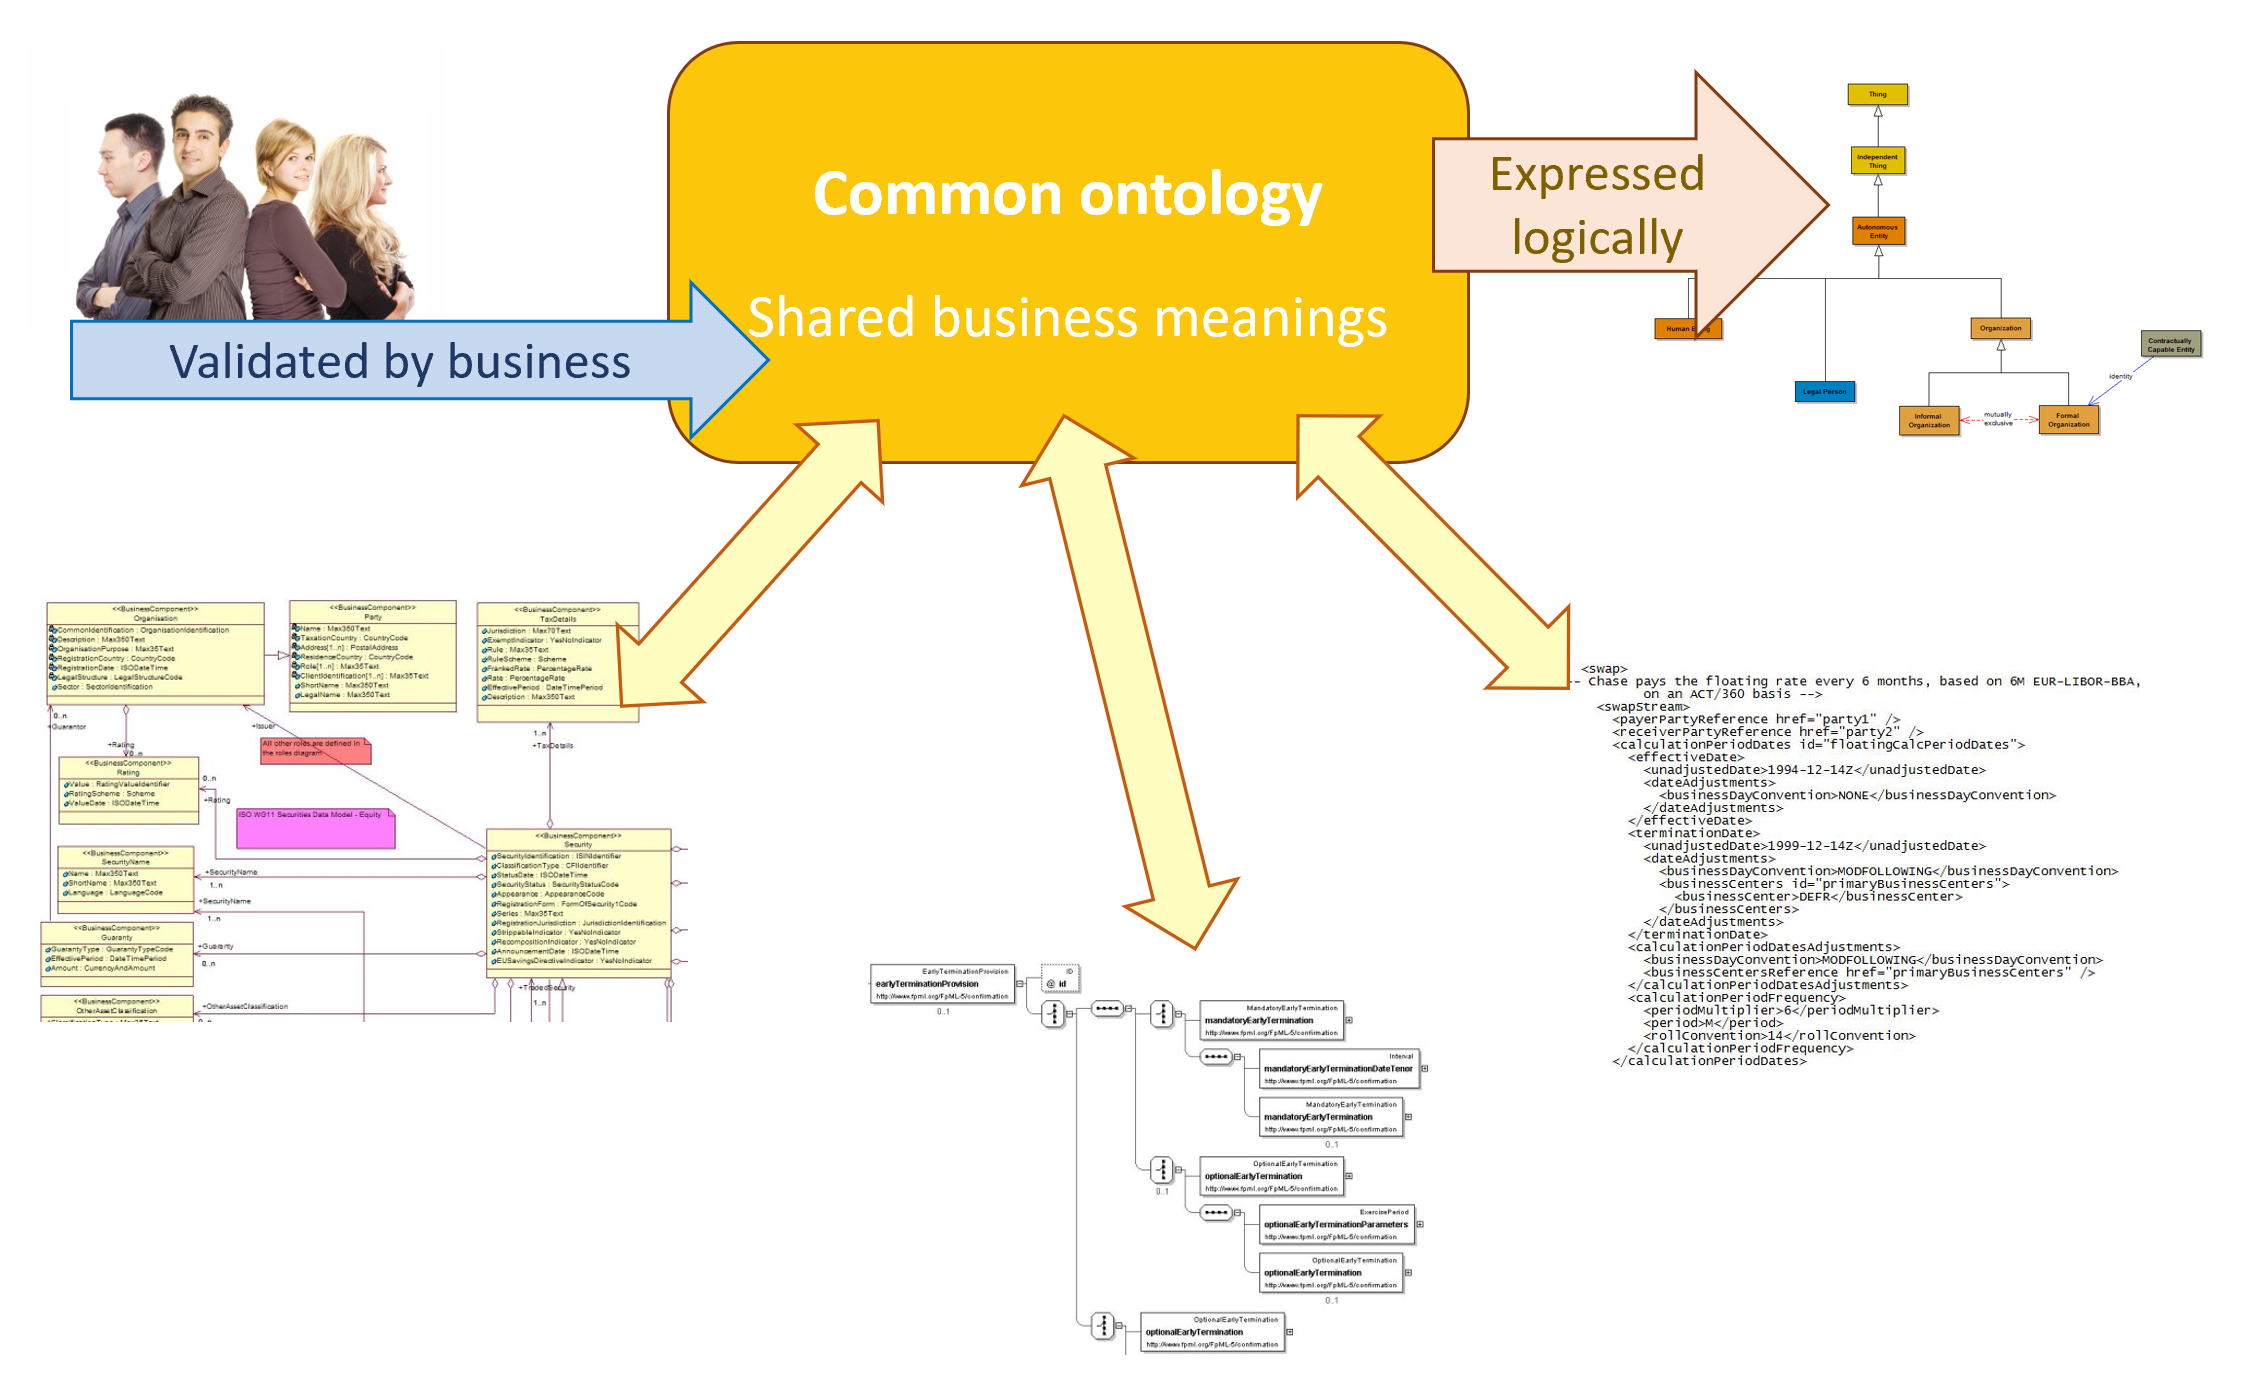 Ontology motivations overview graphic